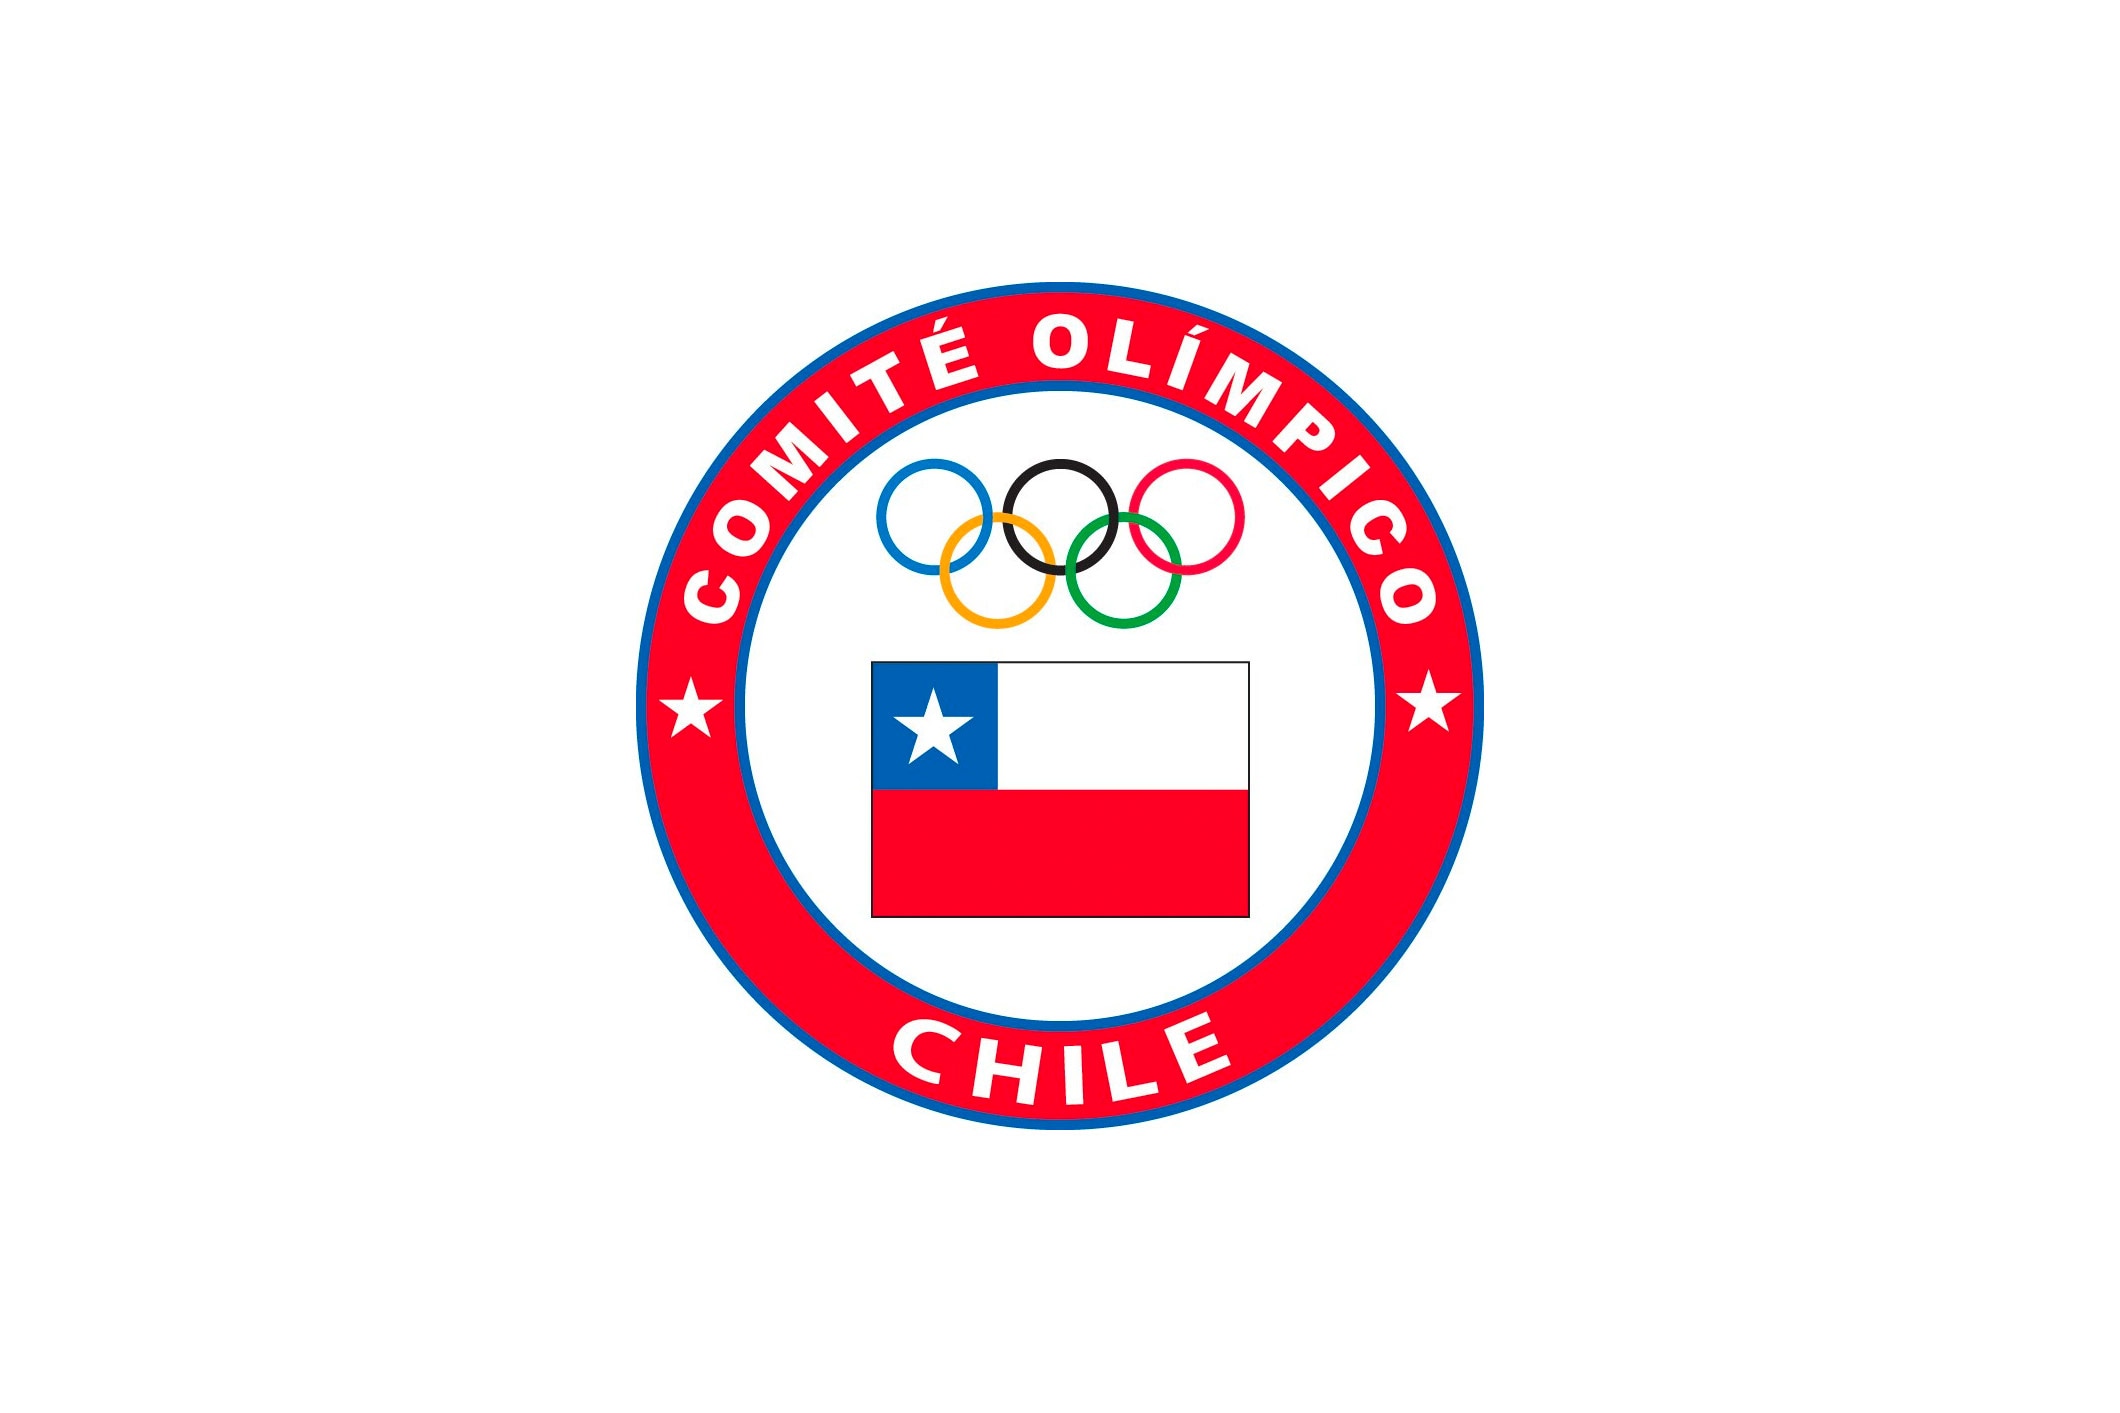 News from the Chile National Olympic Committee Olympic News